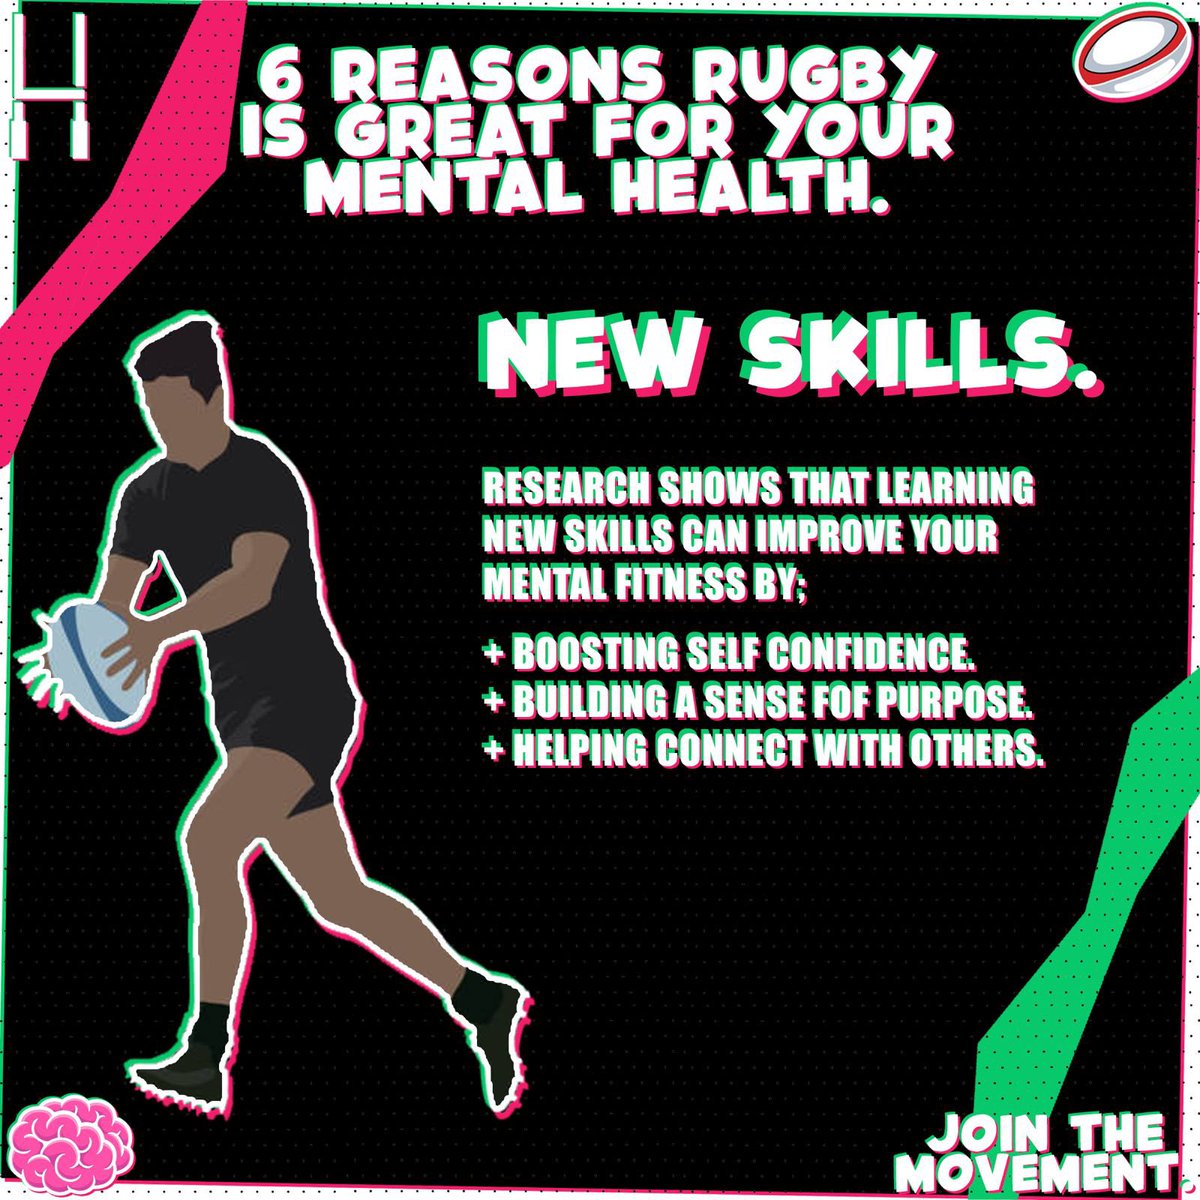 𝗟𝗘𝗔𝗥𝗡 𝗡𝗘𝗪 𝗦𝗞𝗜𝗟𝗟𝗦 💚 Learning & stimulating ourselves mentally has been shown to protect our mental health 🧠 It provides a great opportunity to make new friendships, learn new skills & build a sense of purpose 🙌 #TackleTheStigma 🗣️